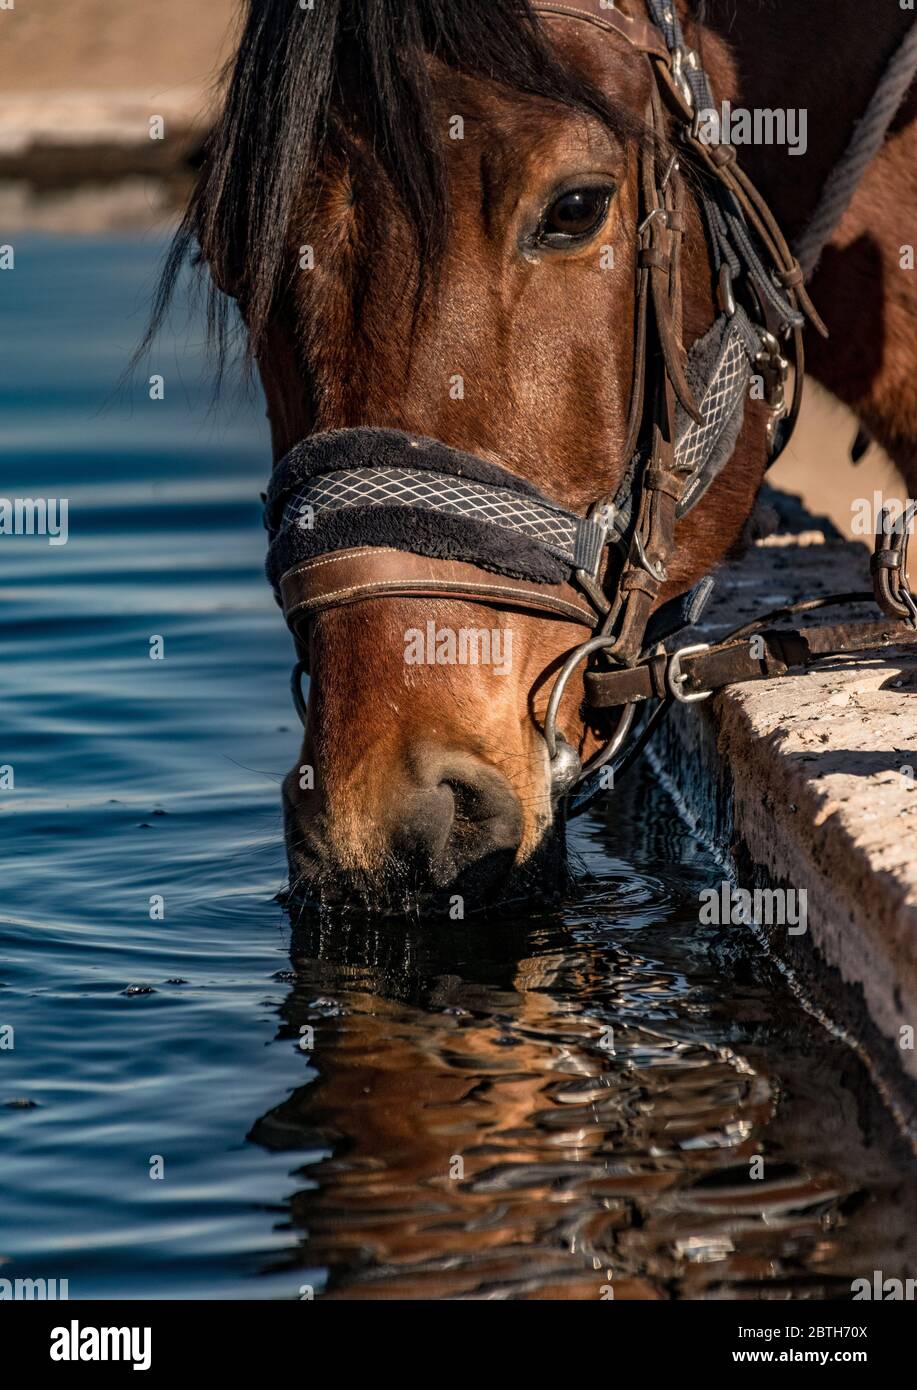 Portrait of a horse drinking water Stock Photo